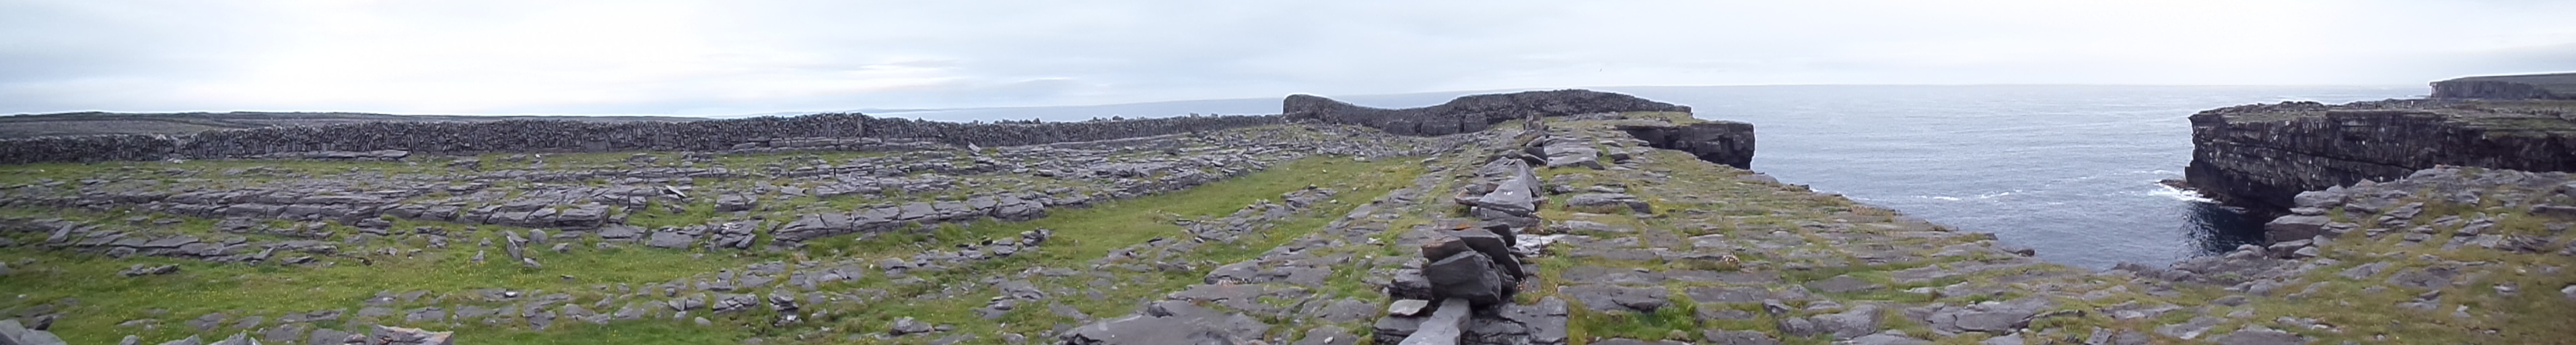 The Black Fort is one of three Bronze Age fortresses on Inishmor, which are basically 4 concentric circular walls made out of a whole lot of small stones (Category:  Travel)